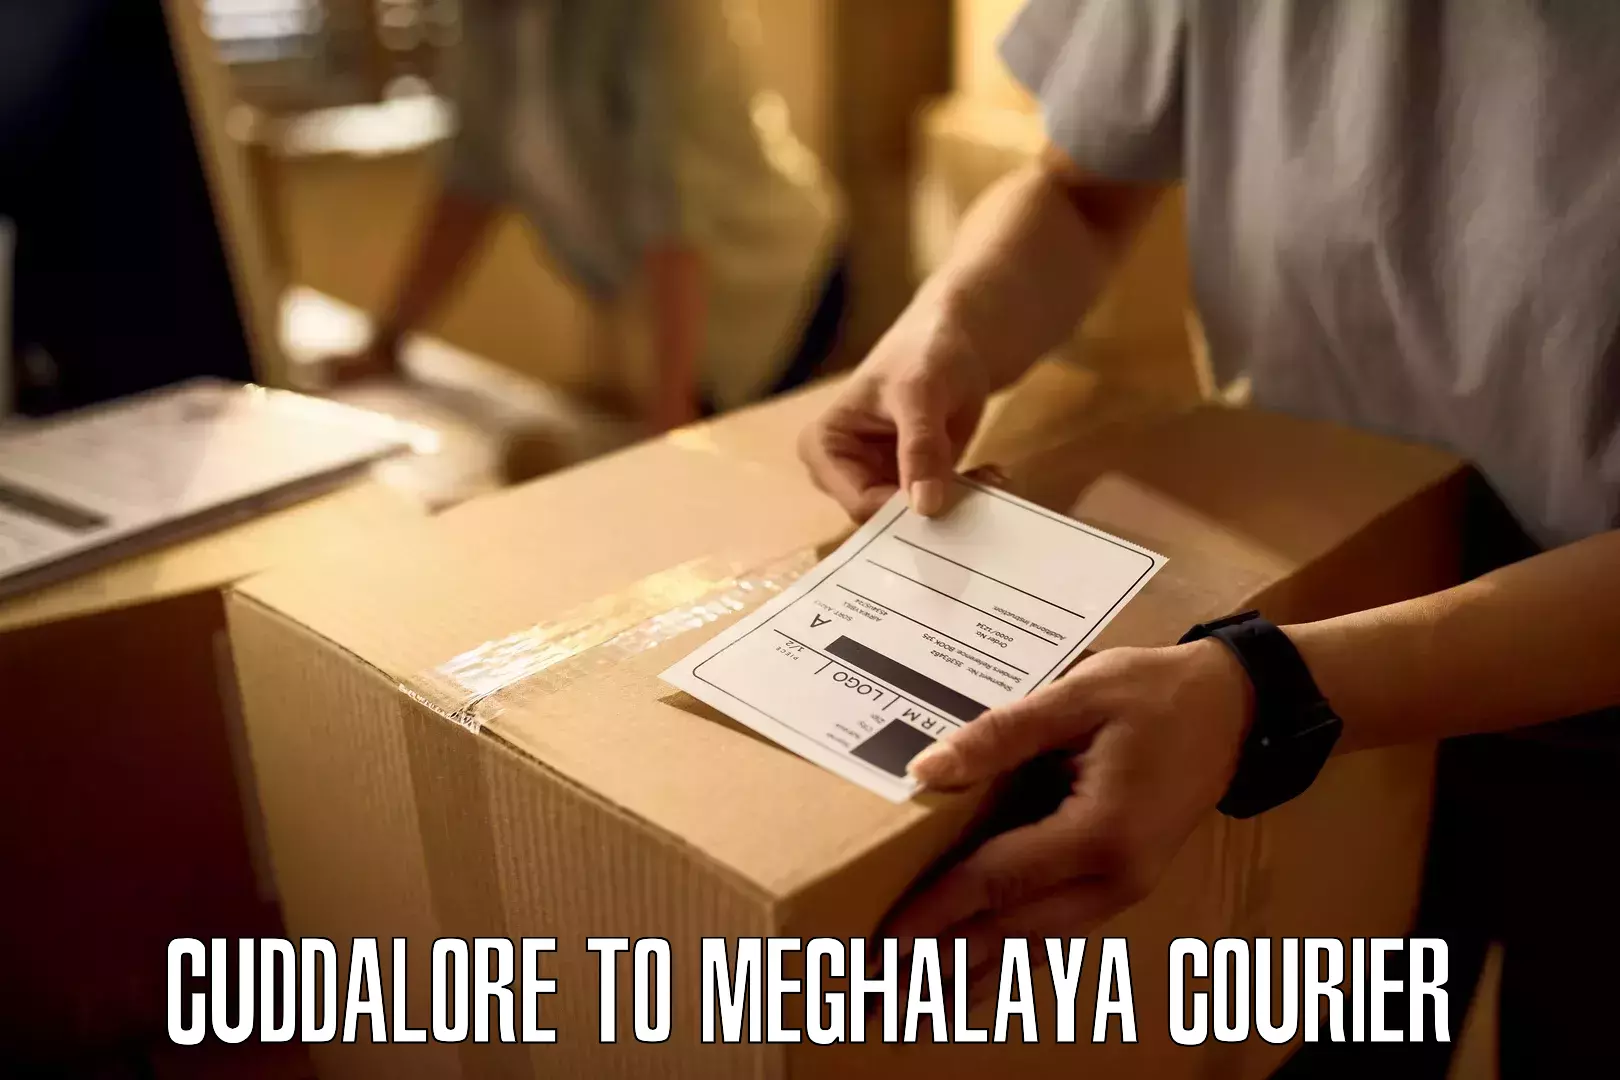 Automated parcel services Cuddalore to Meghalaya